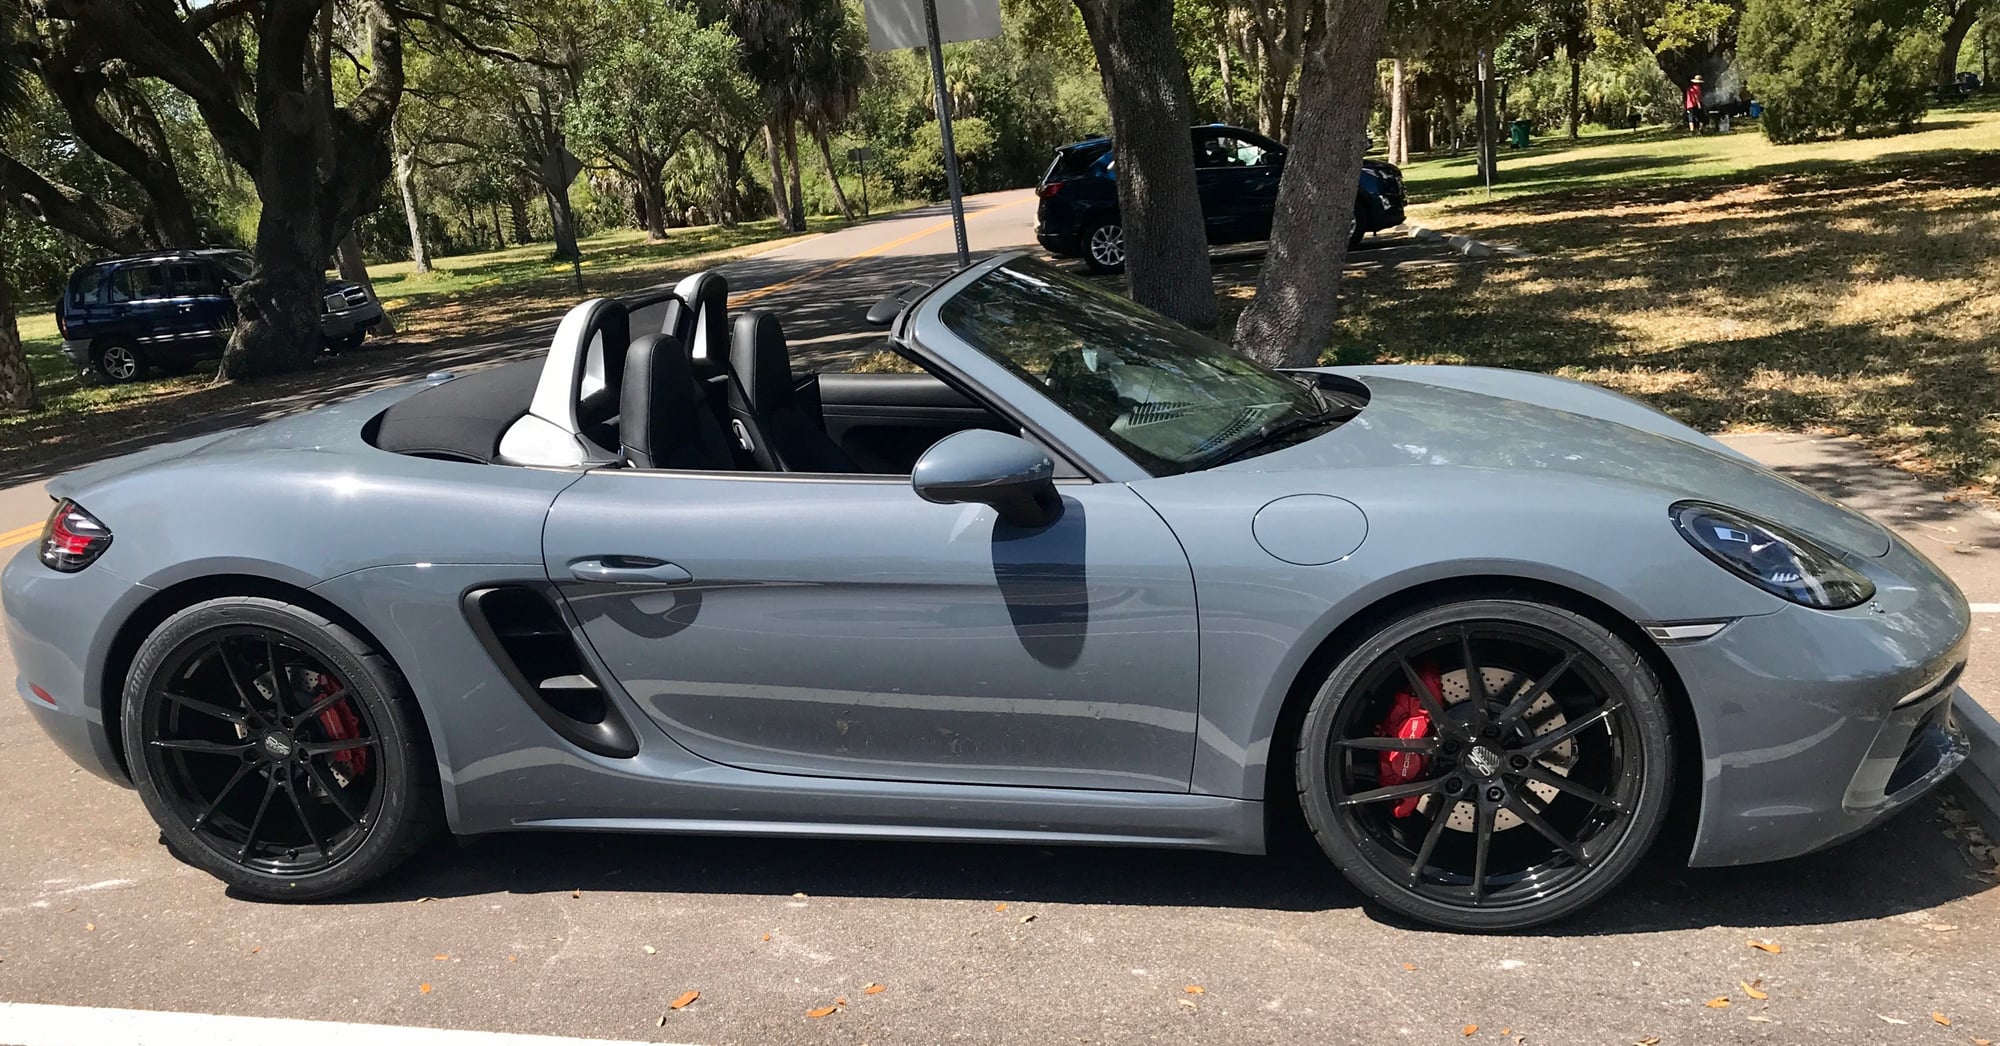 Wheels and Tires/Axles - Set of OZ wheels with TPMS and brand New Hoosier R7's - Used - 2017 to 2021 Porsche 718 Boxster - 2017 to 2021 Porsche 718 Cayman - Tampa, FL 33626, United States